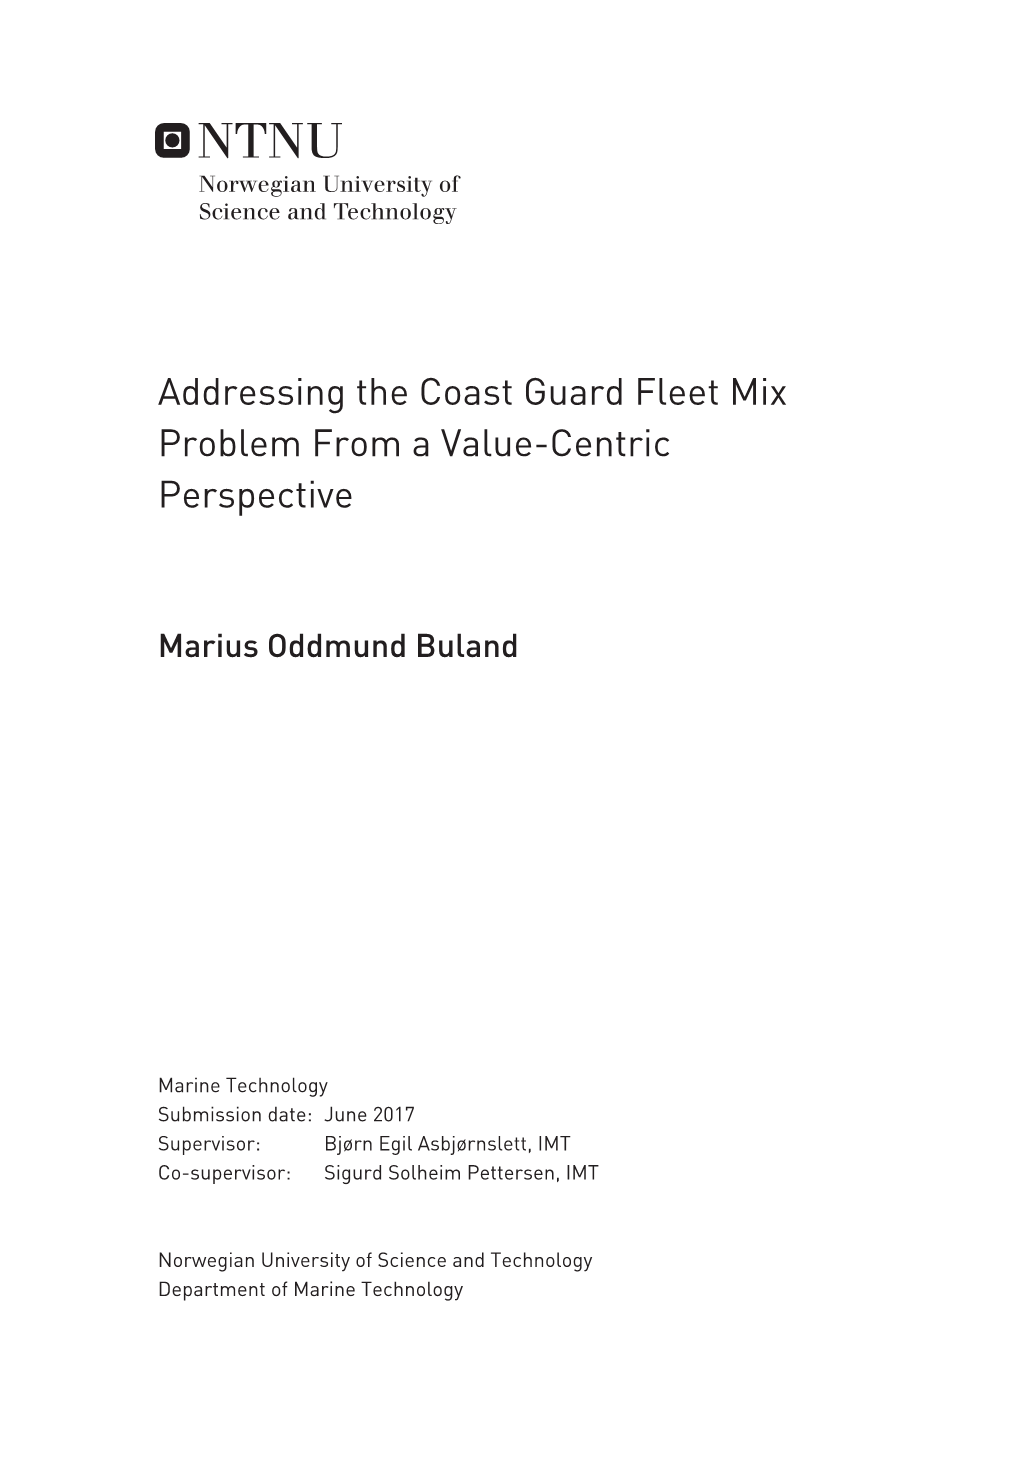 Addressing the Coast Guard Fleet Mix Problem from a Value-Centric Perspective